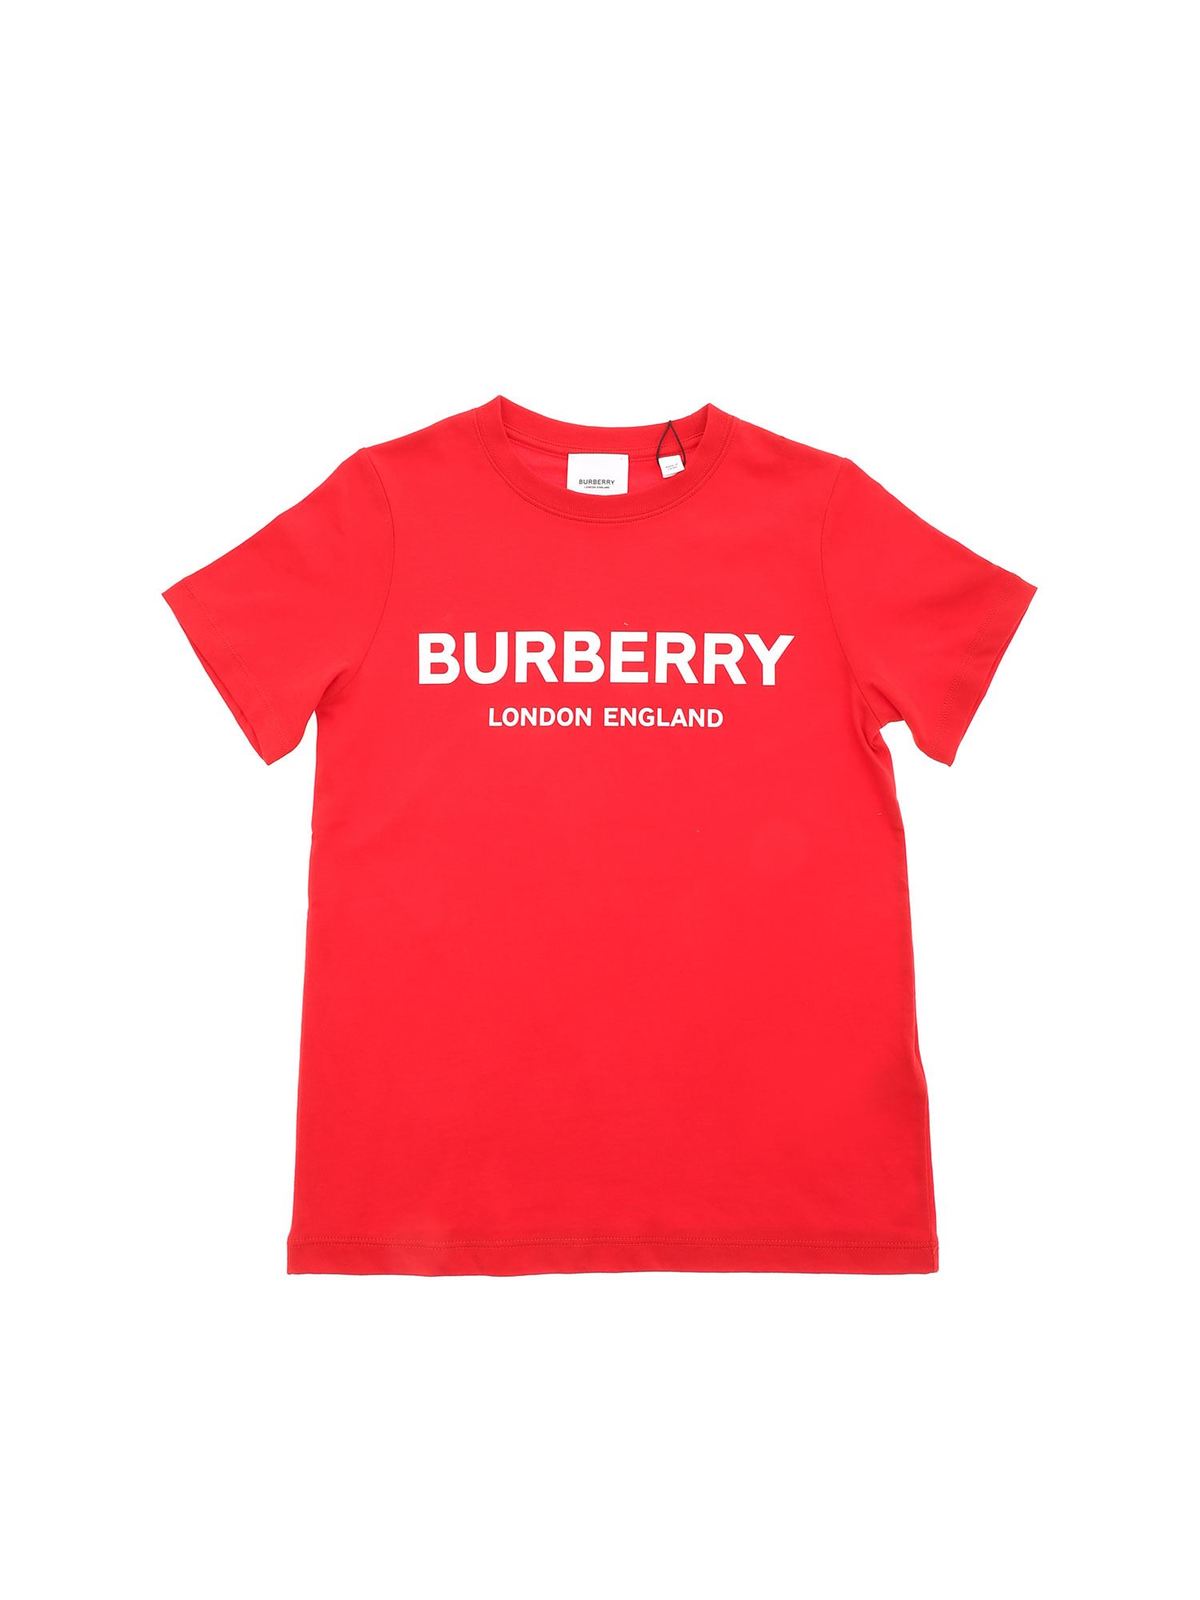 Burberry Shirt Kids Red Flash Sales, 52% OFF | lagence.tv